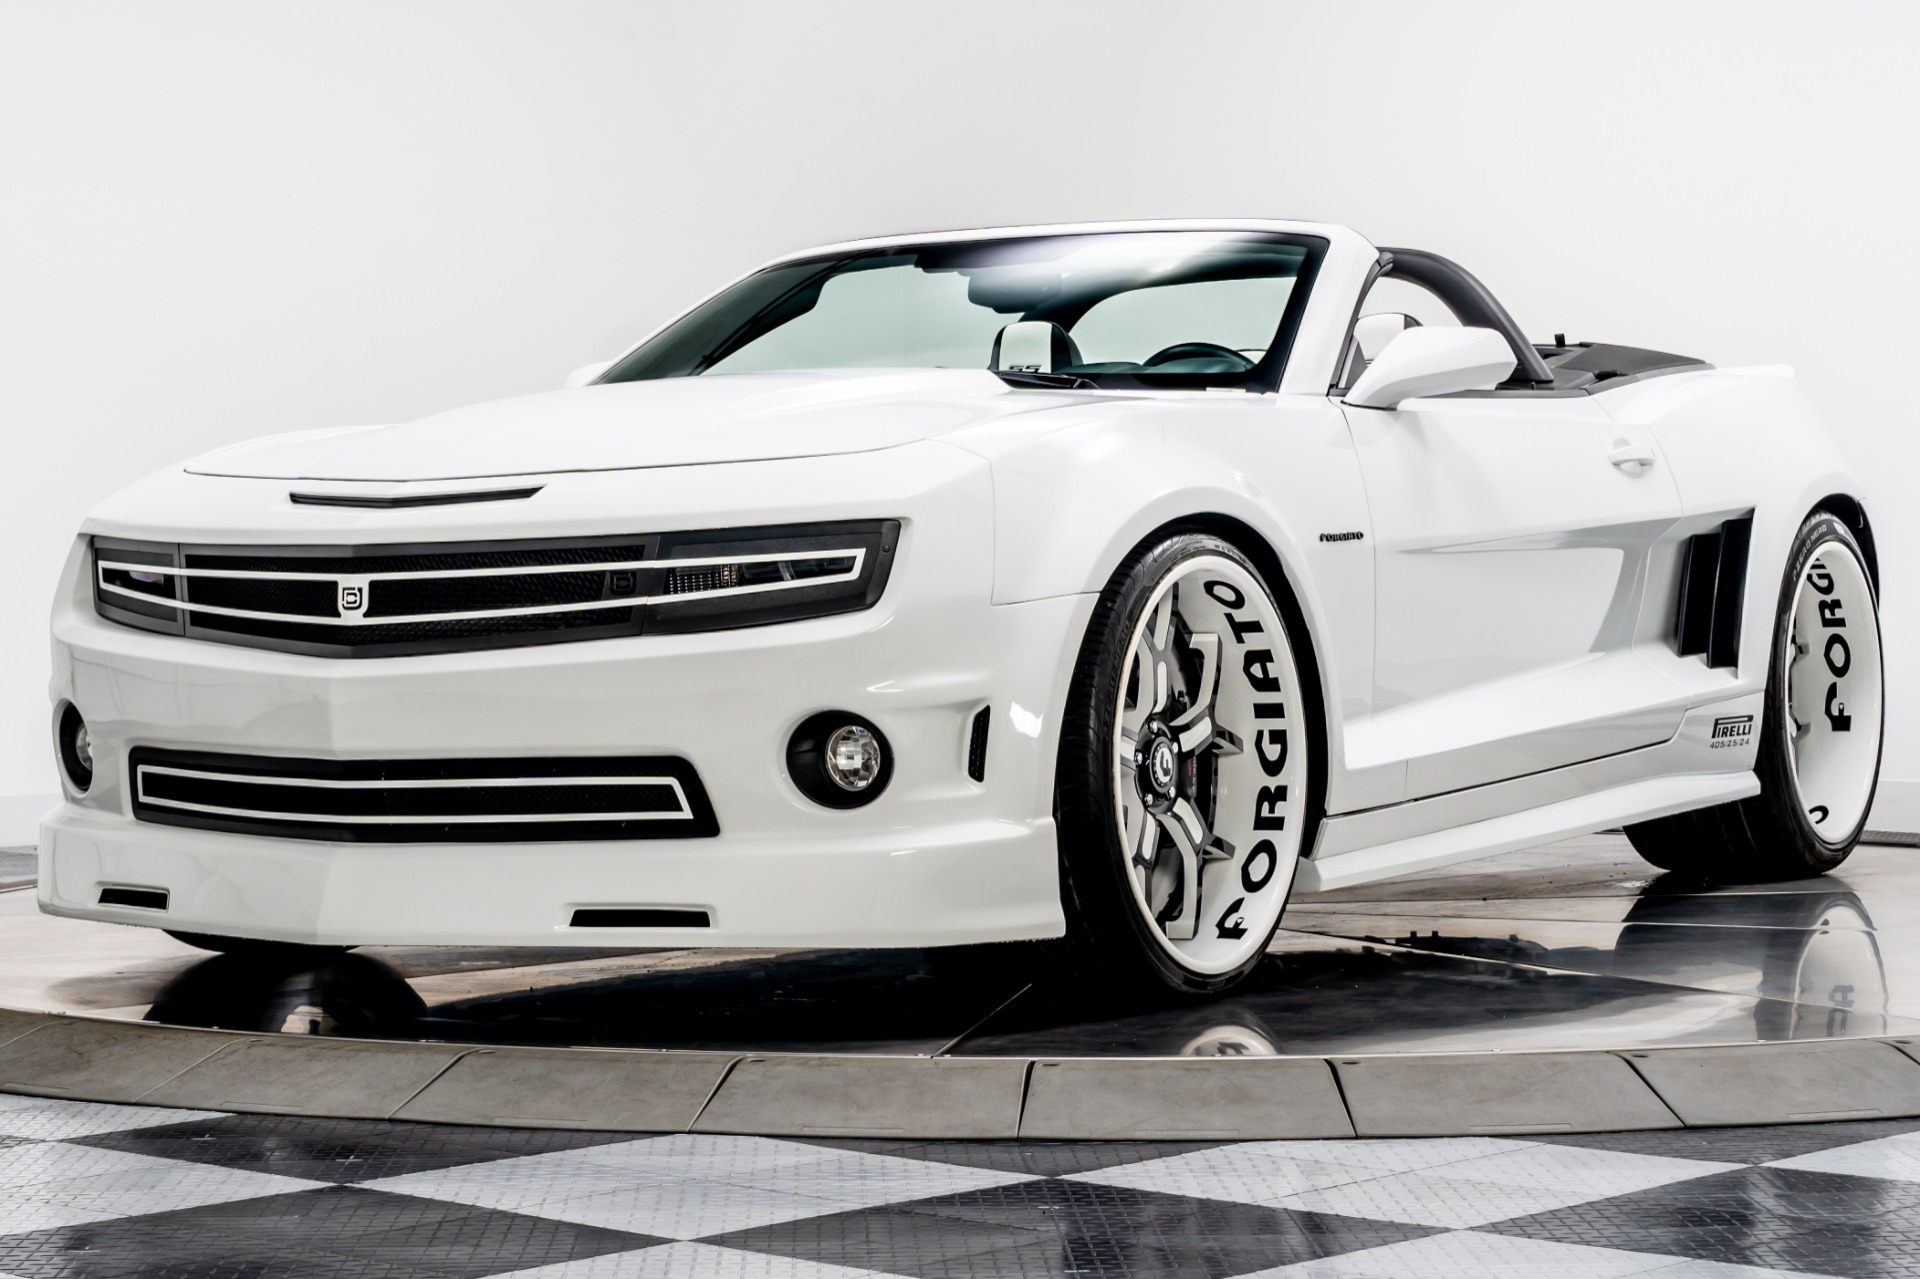 Used 2011 Chevrolet Camaro SS Forgiato Widebody Convertible For Sale (Sold)  | Marshall Goldman Motor Sales Stock #W20992